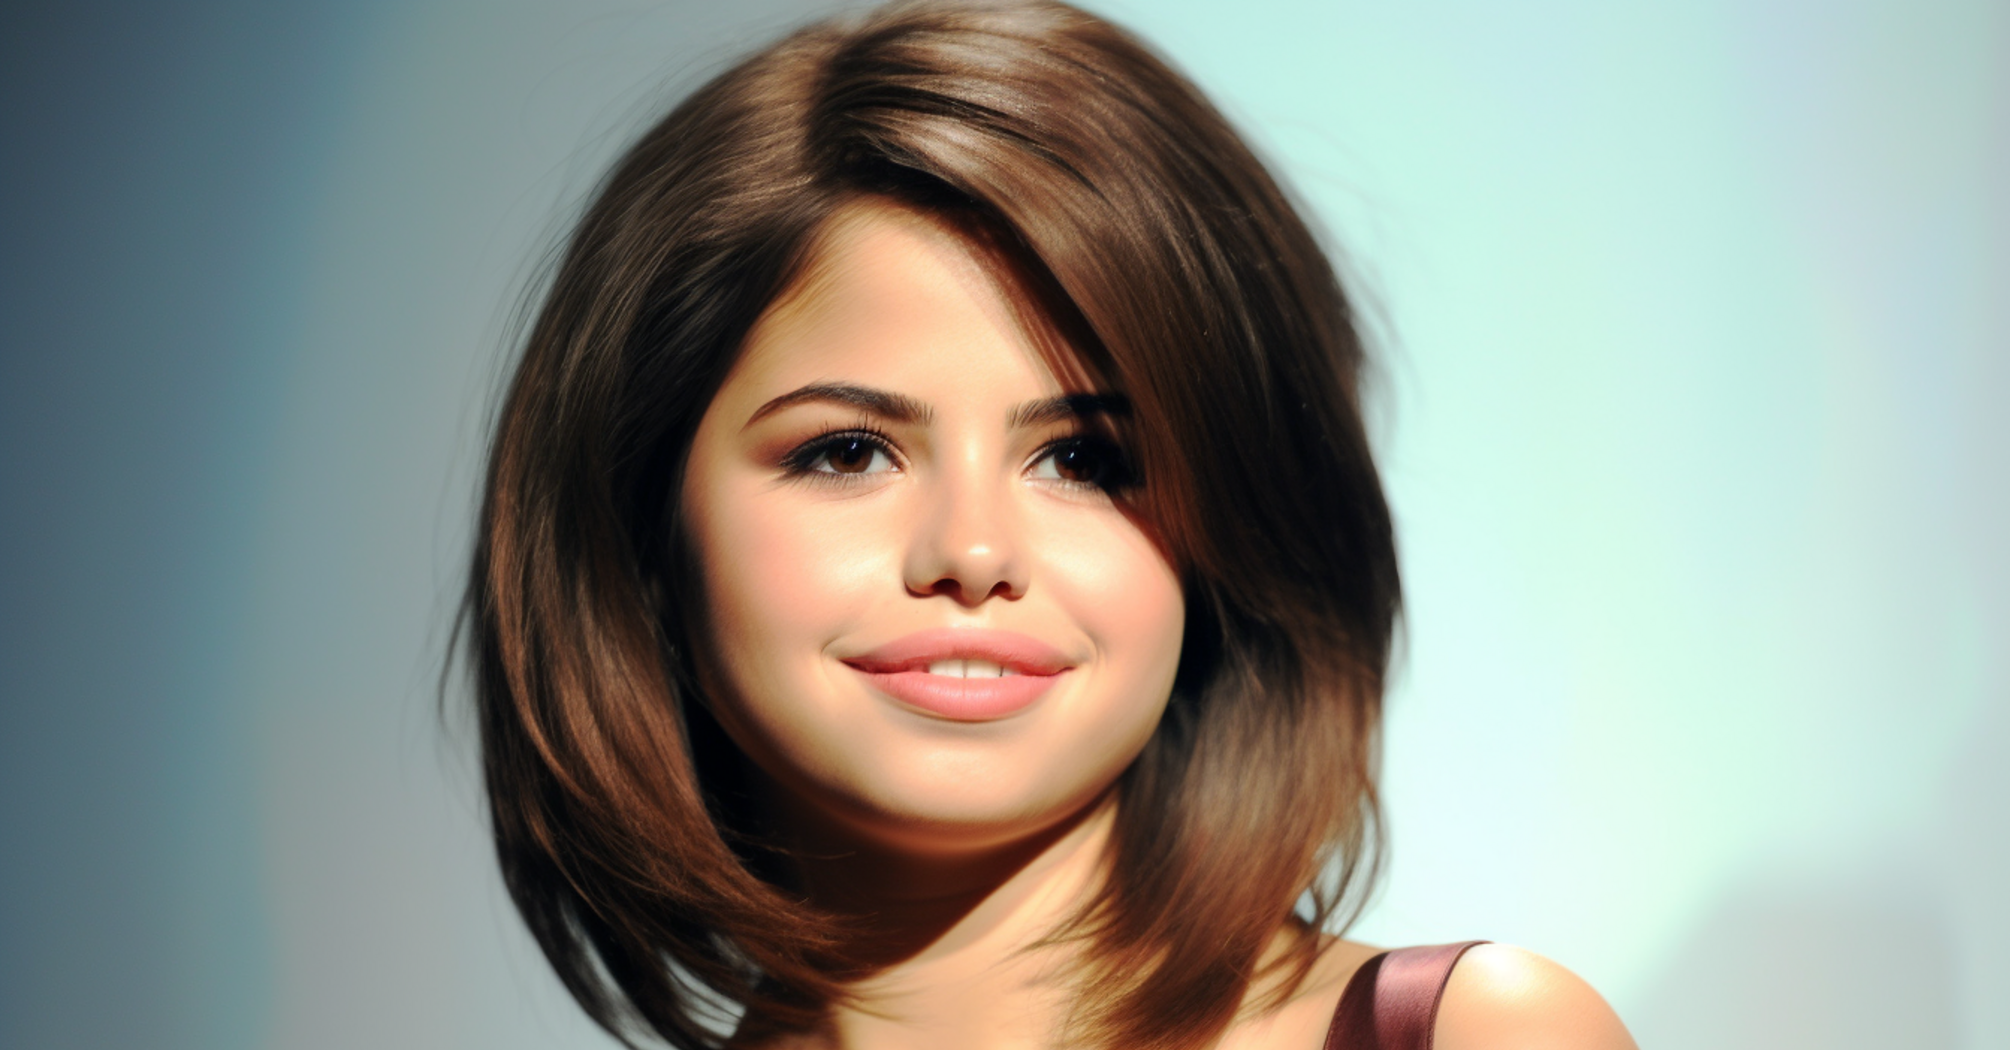 A modern idol and philanthropist: Top 5 interesting facts about Selena Gomez